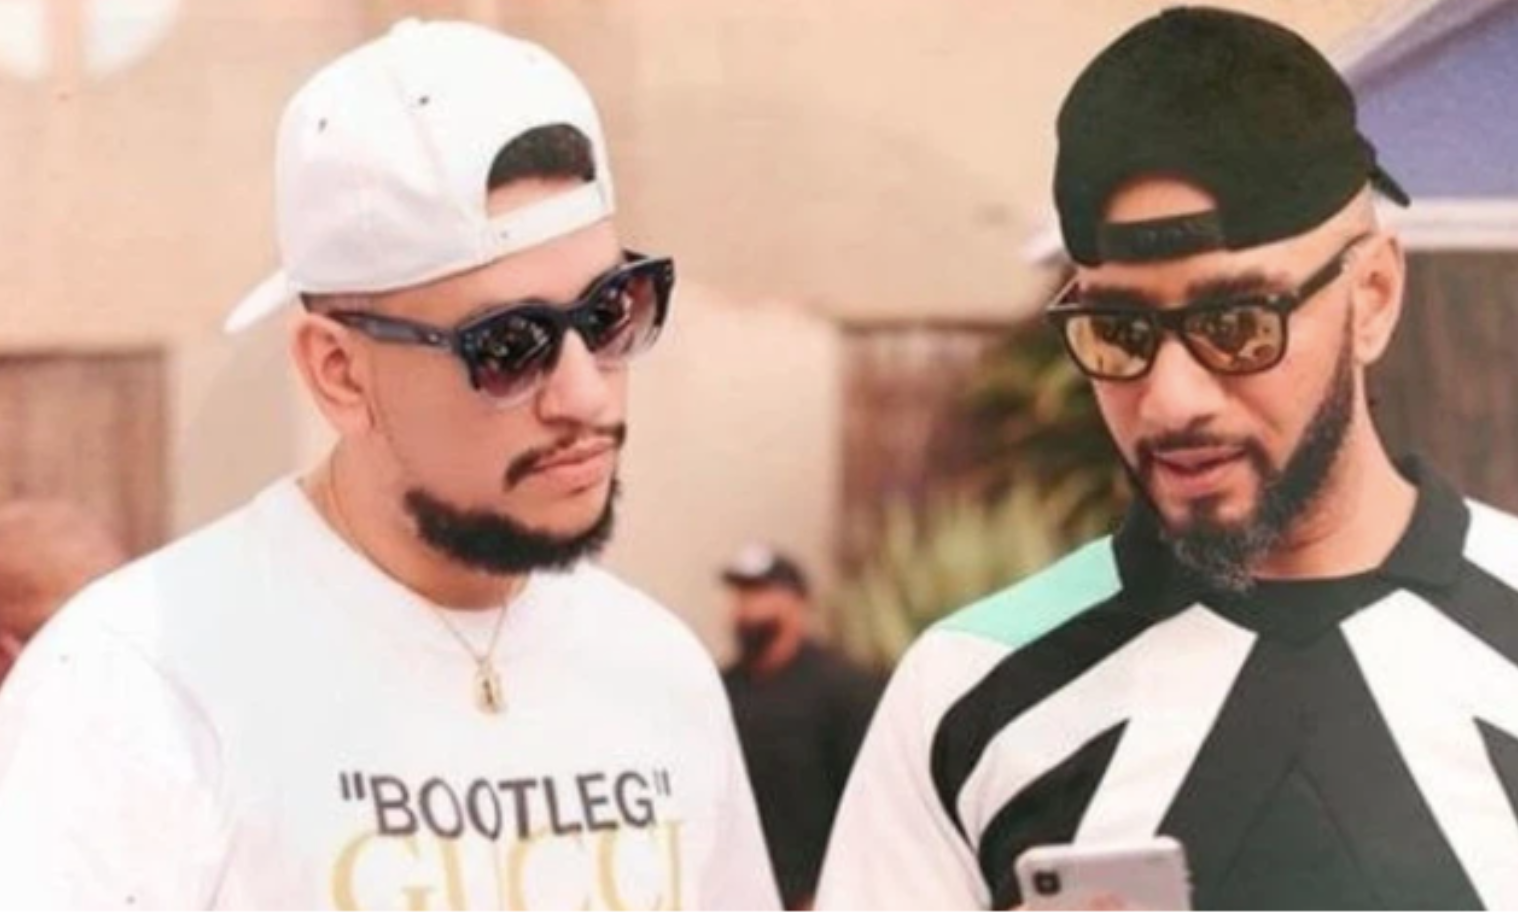 SWIZZ BEATZ AND MORE PAY TRIBUTE TO SLAIN SOUTH AFRICAN RAPPER AKA